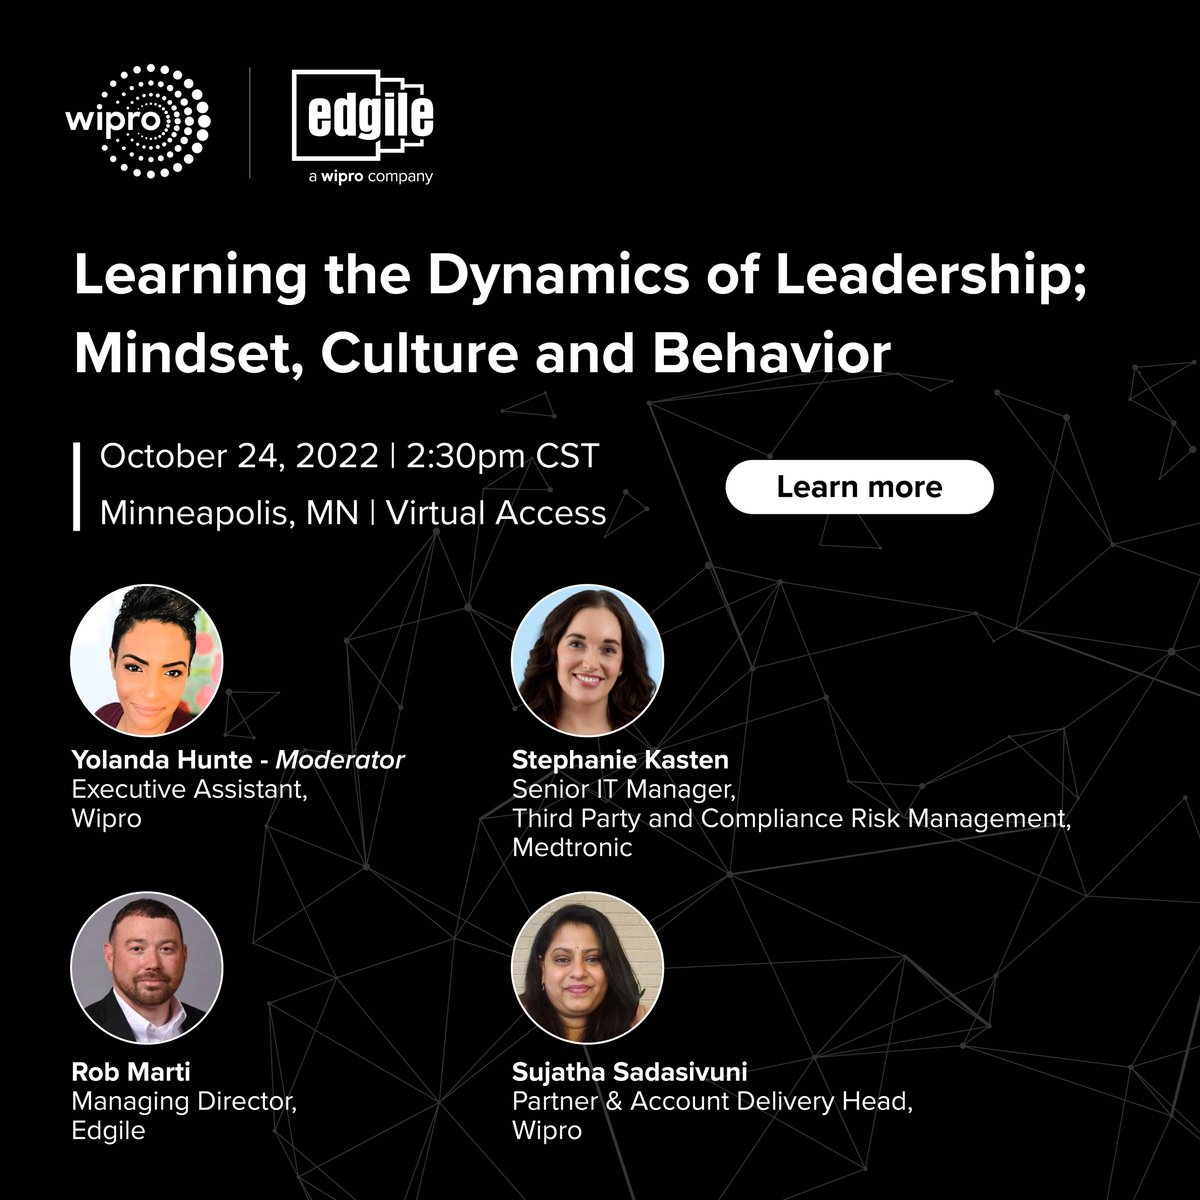 Join Wipro Women in Cyber today at the 2022 #CyberSecuritySummit for a discussion about leadership dynamics and how mindset, culture, behavior influence successful leadership. Learn more: edgile.com/cybersecuritys… #Wipro #Edgile